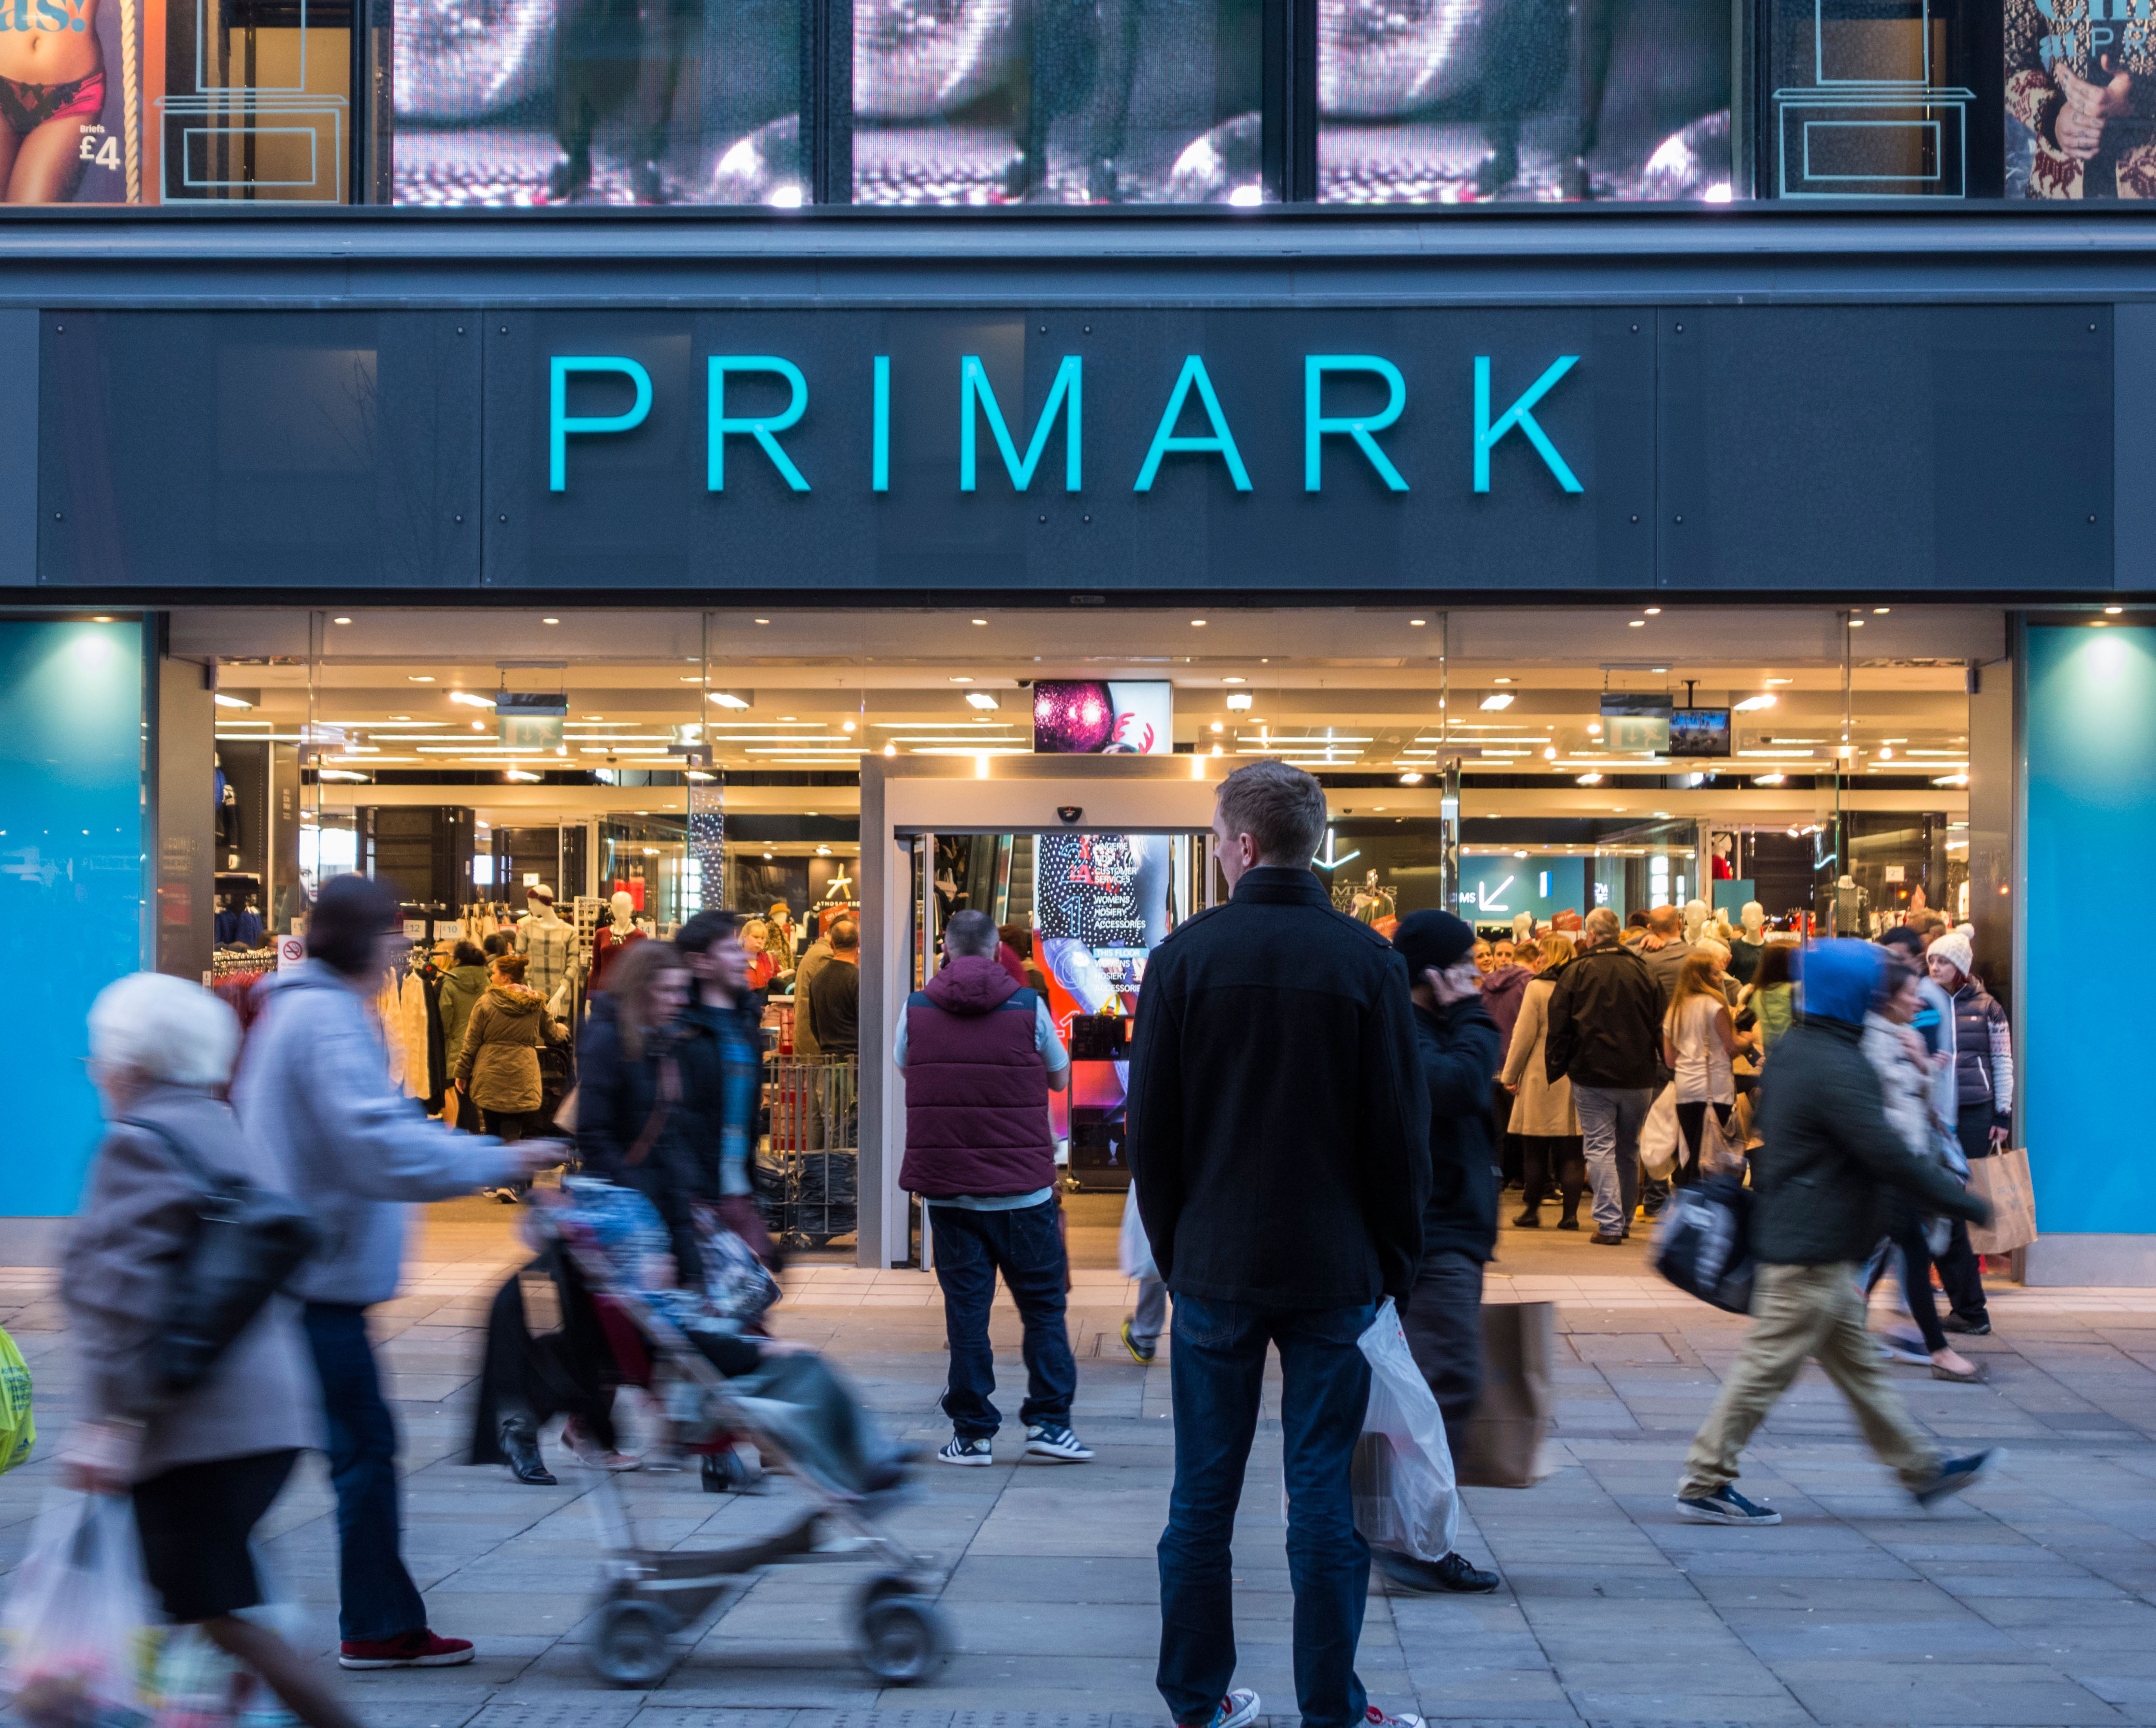 Primark has 'top formula for online shopping' as it shuns home deliveries